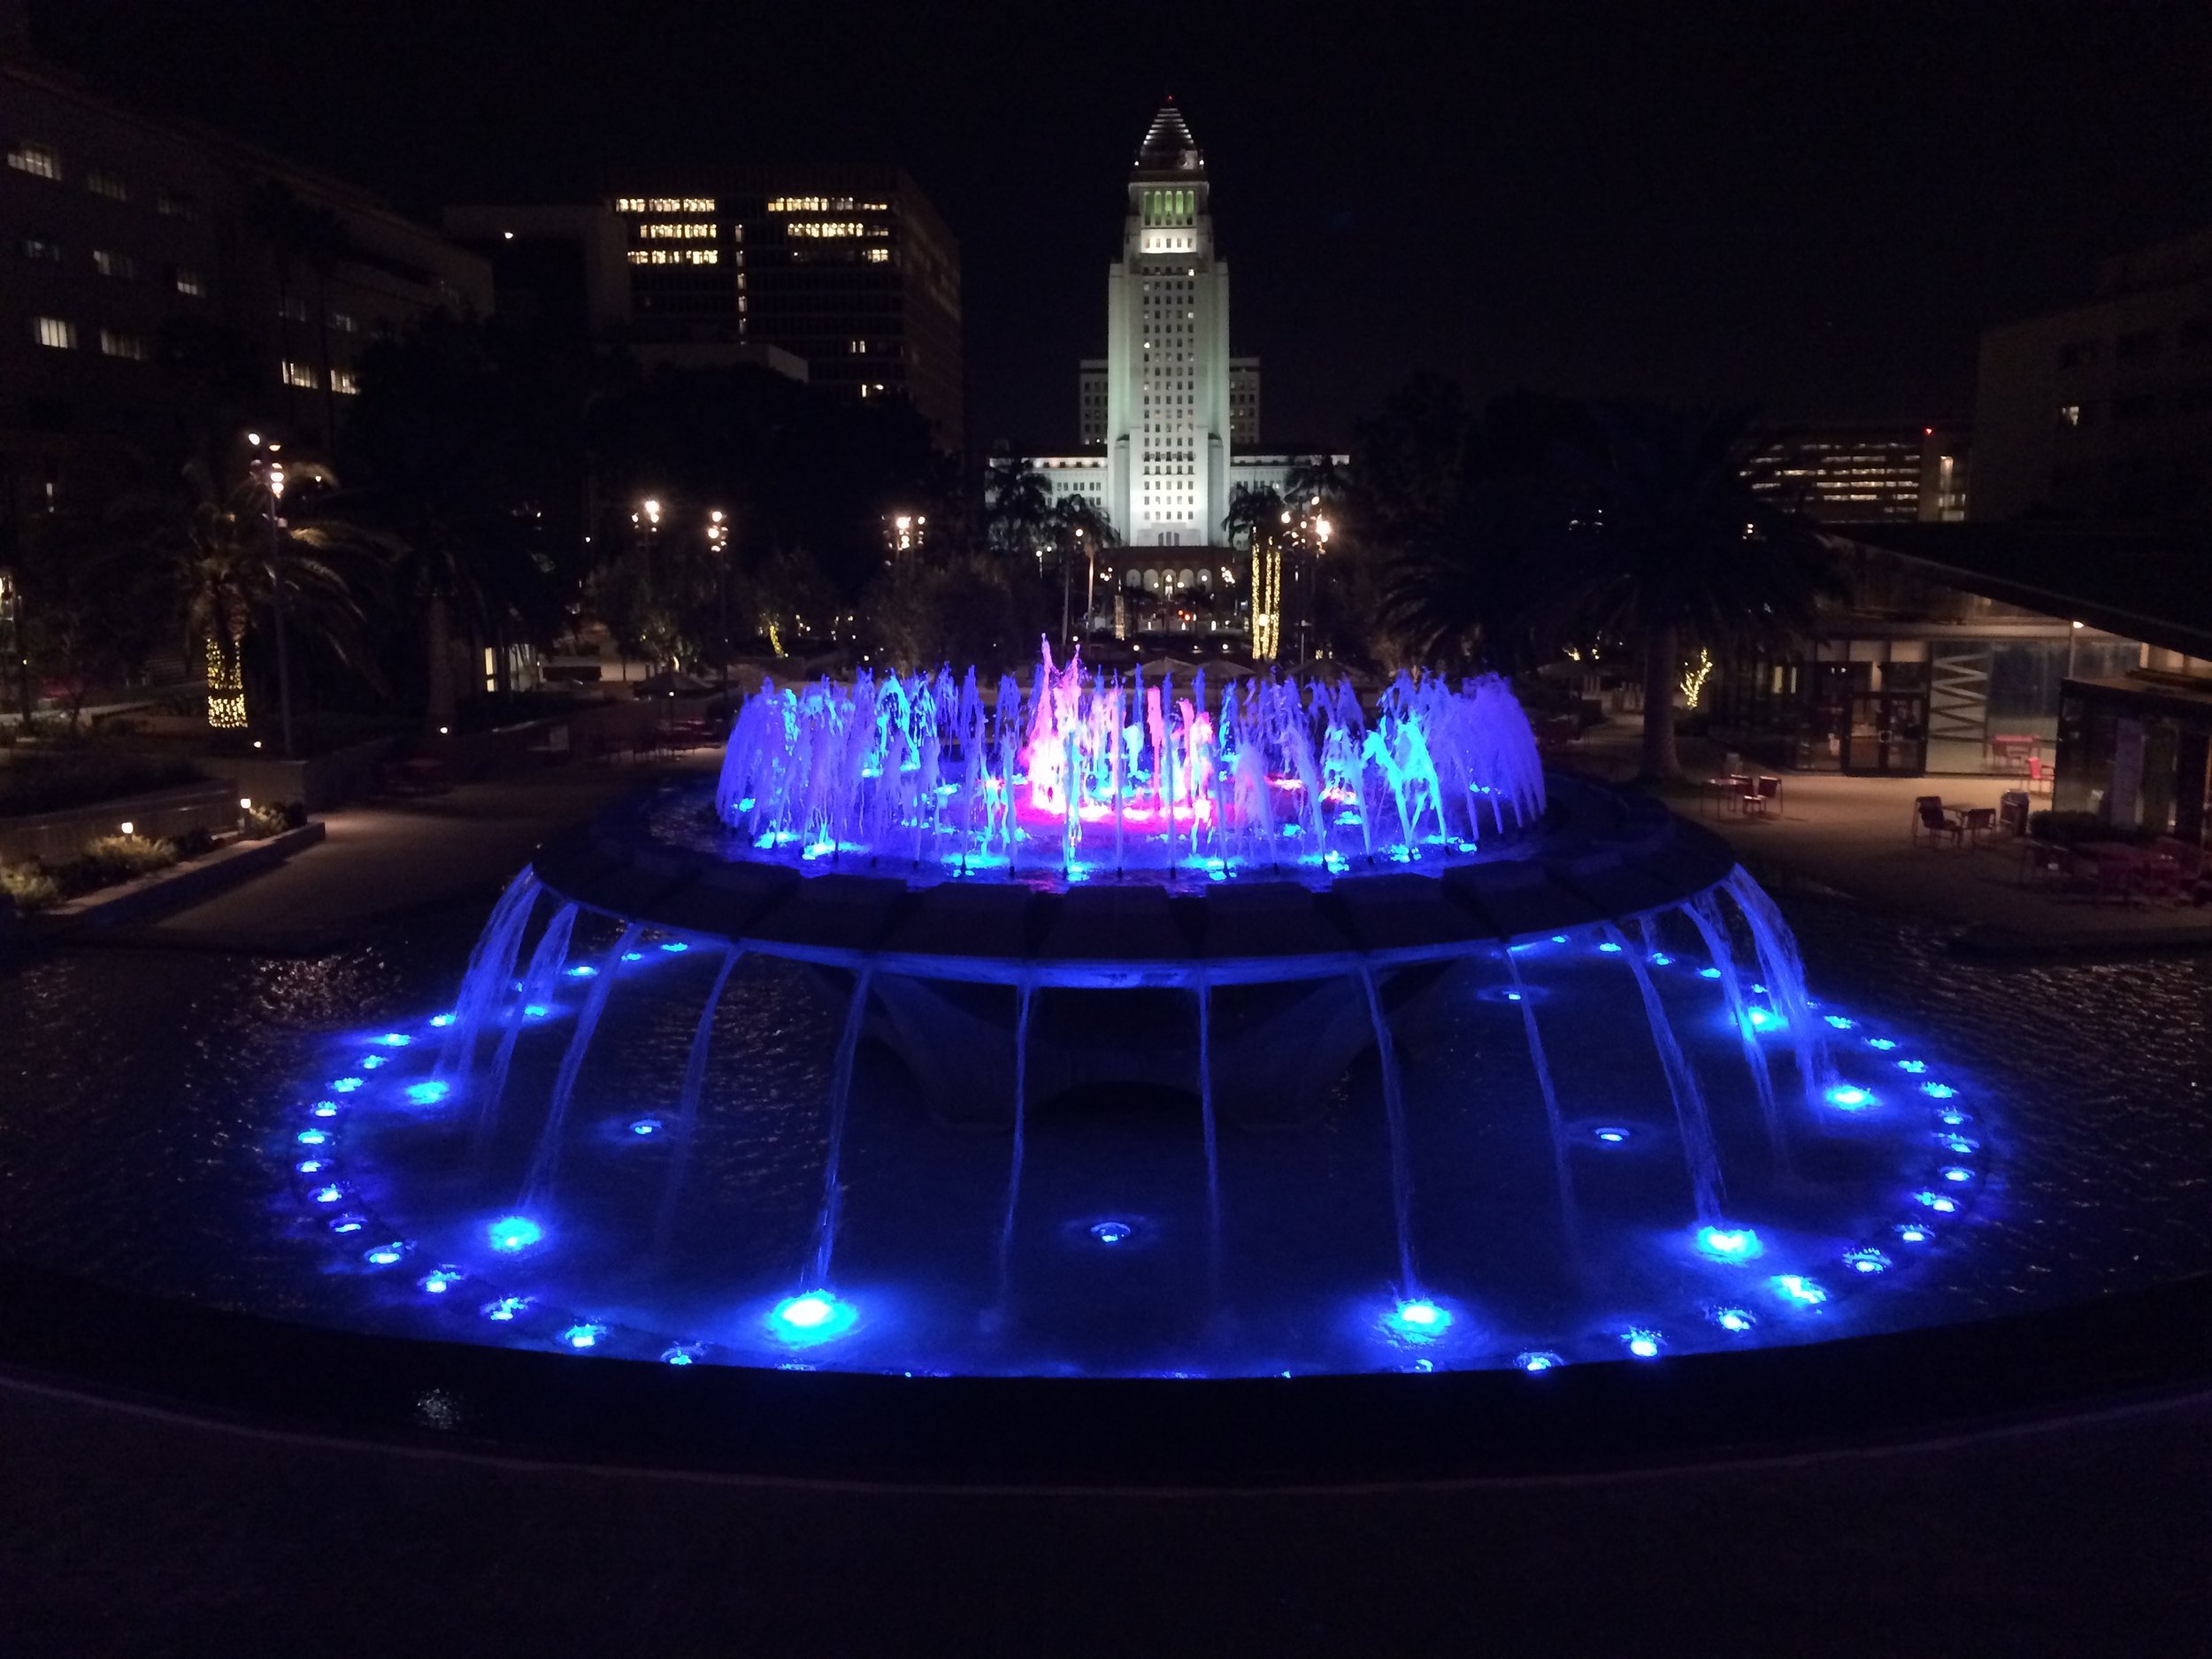 City fountains invite wonder and delight